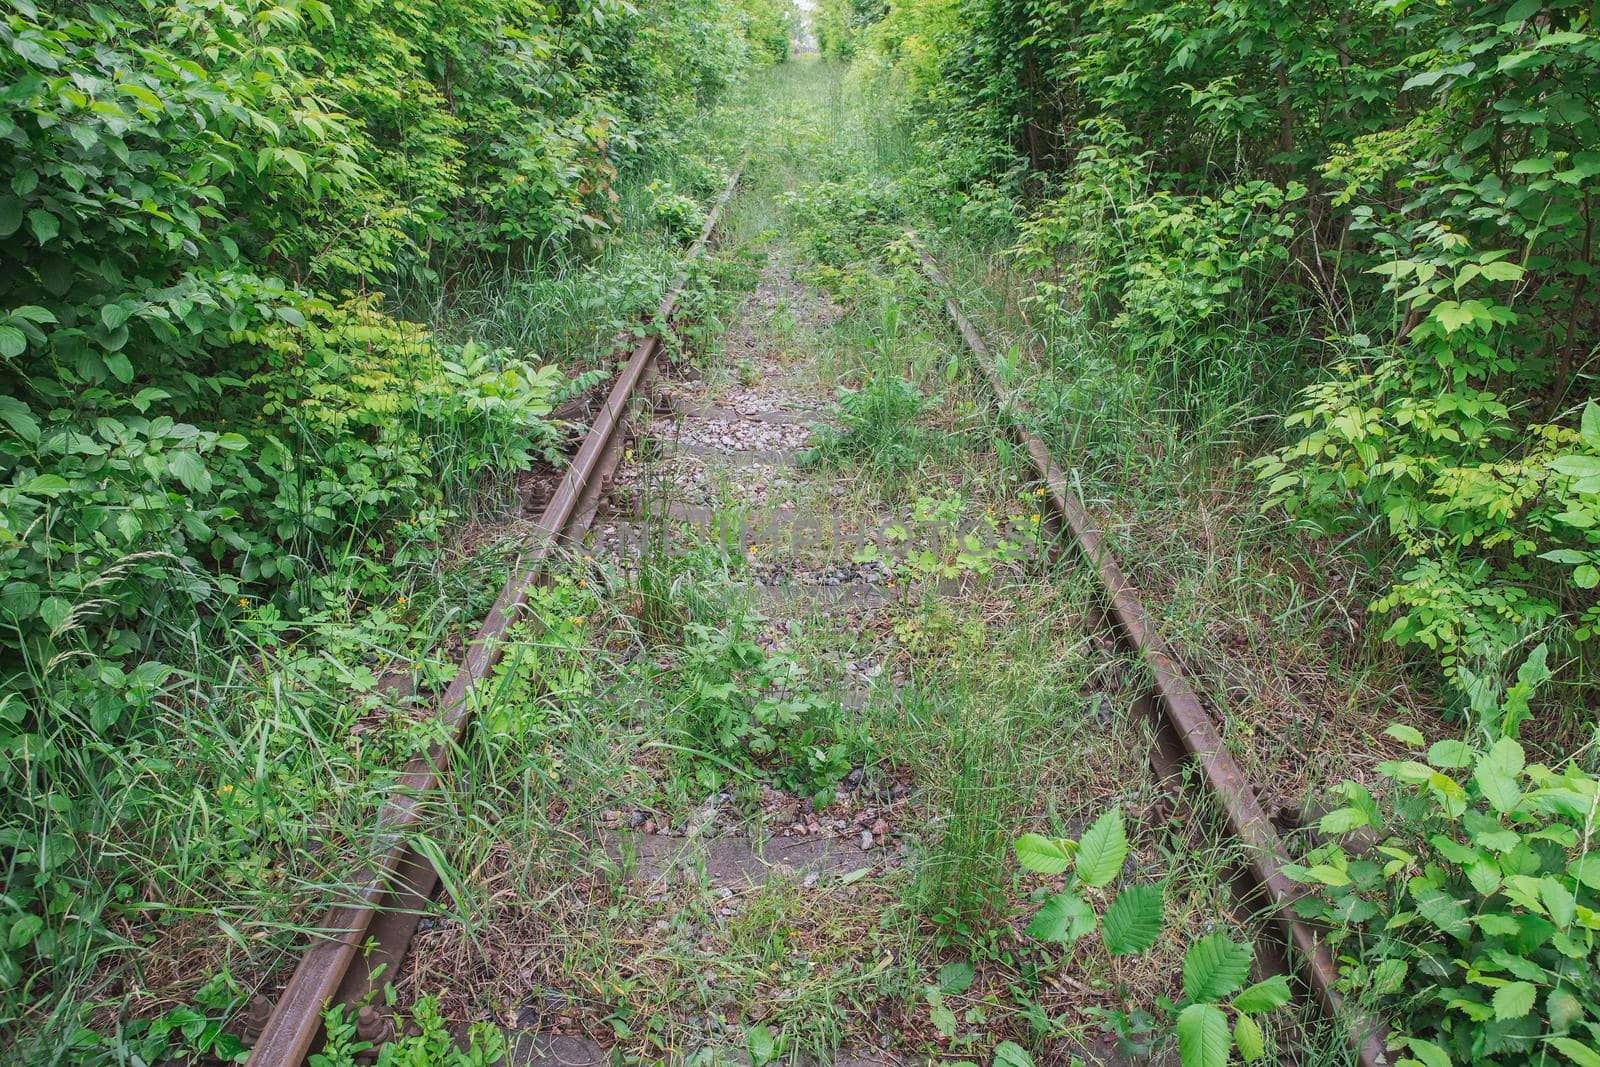 old rusty abandoned railway overgrown with grass, so railway sleepers are not visible